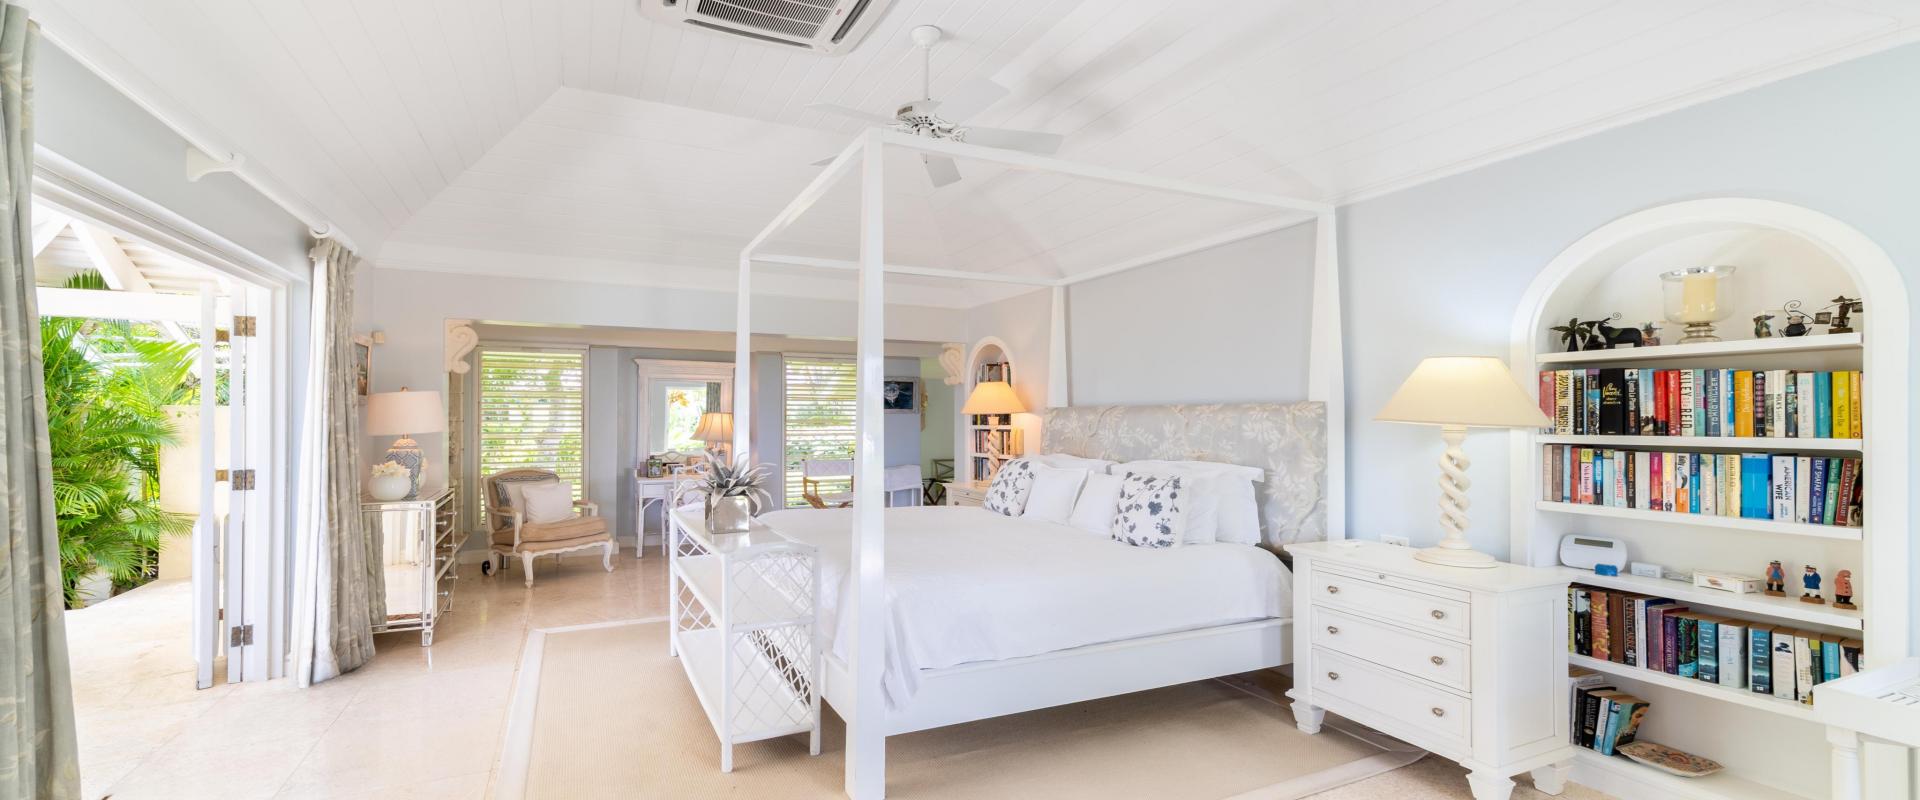 Point of View Holiday Rental In Sandy Lane Barbados Master Bedroom